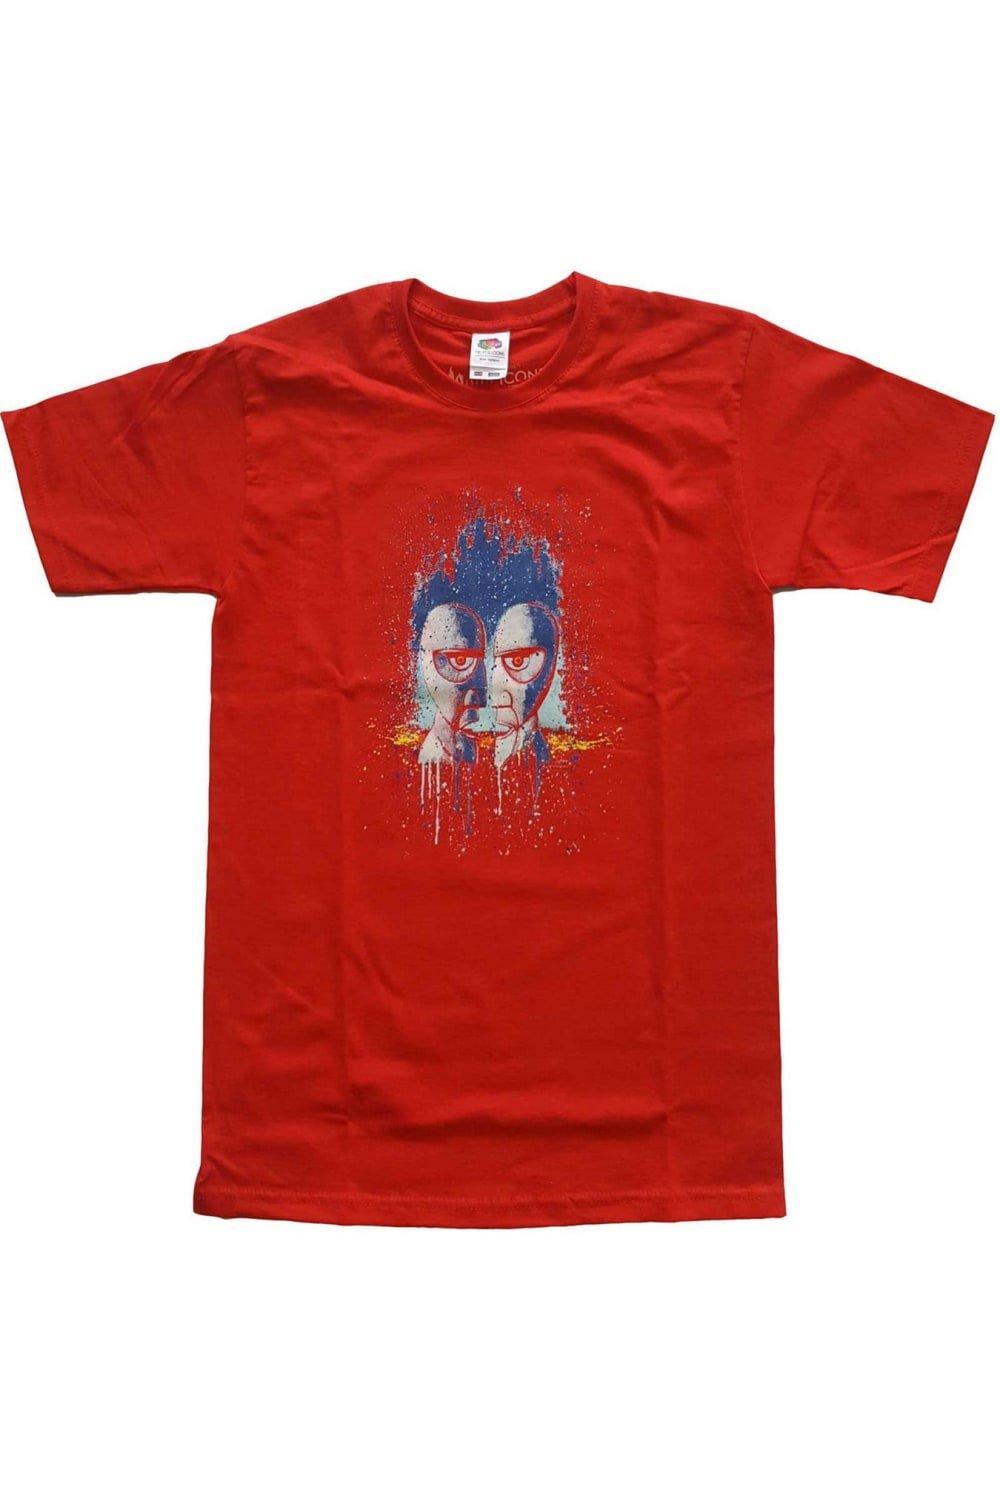 Division Bell Drips T-Shirt